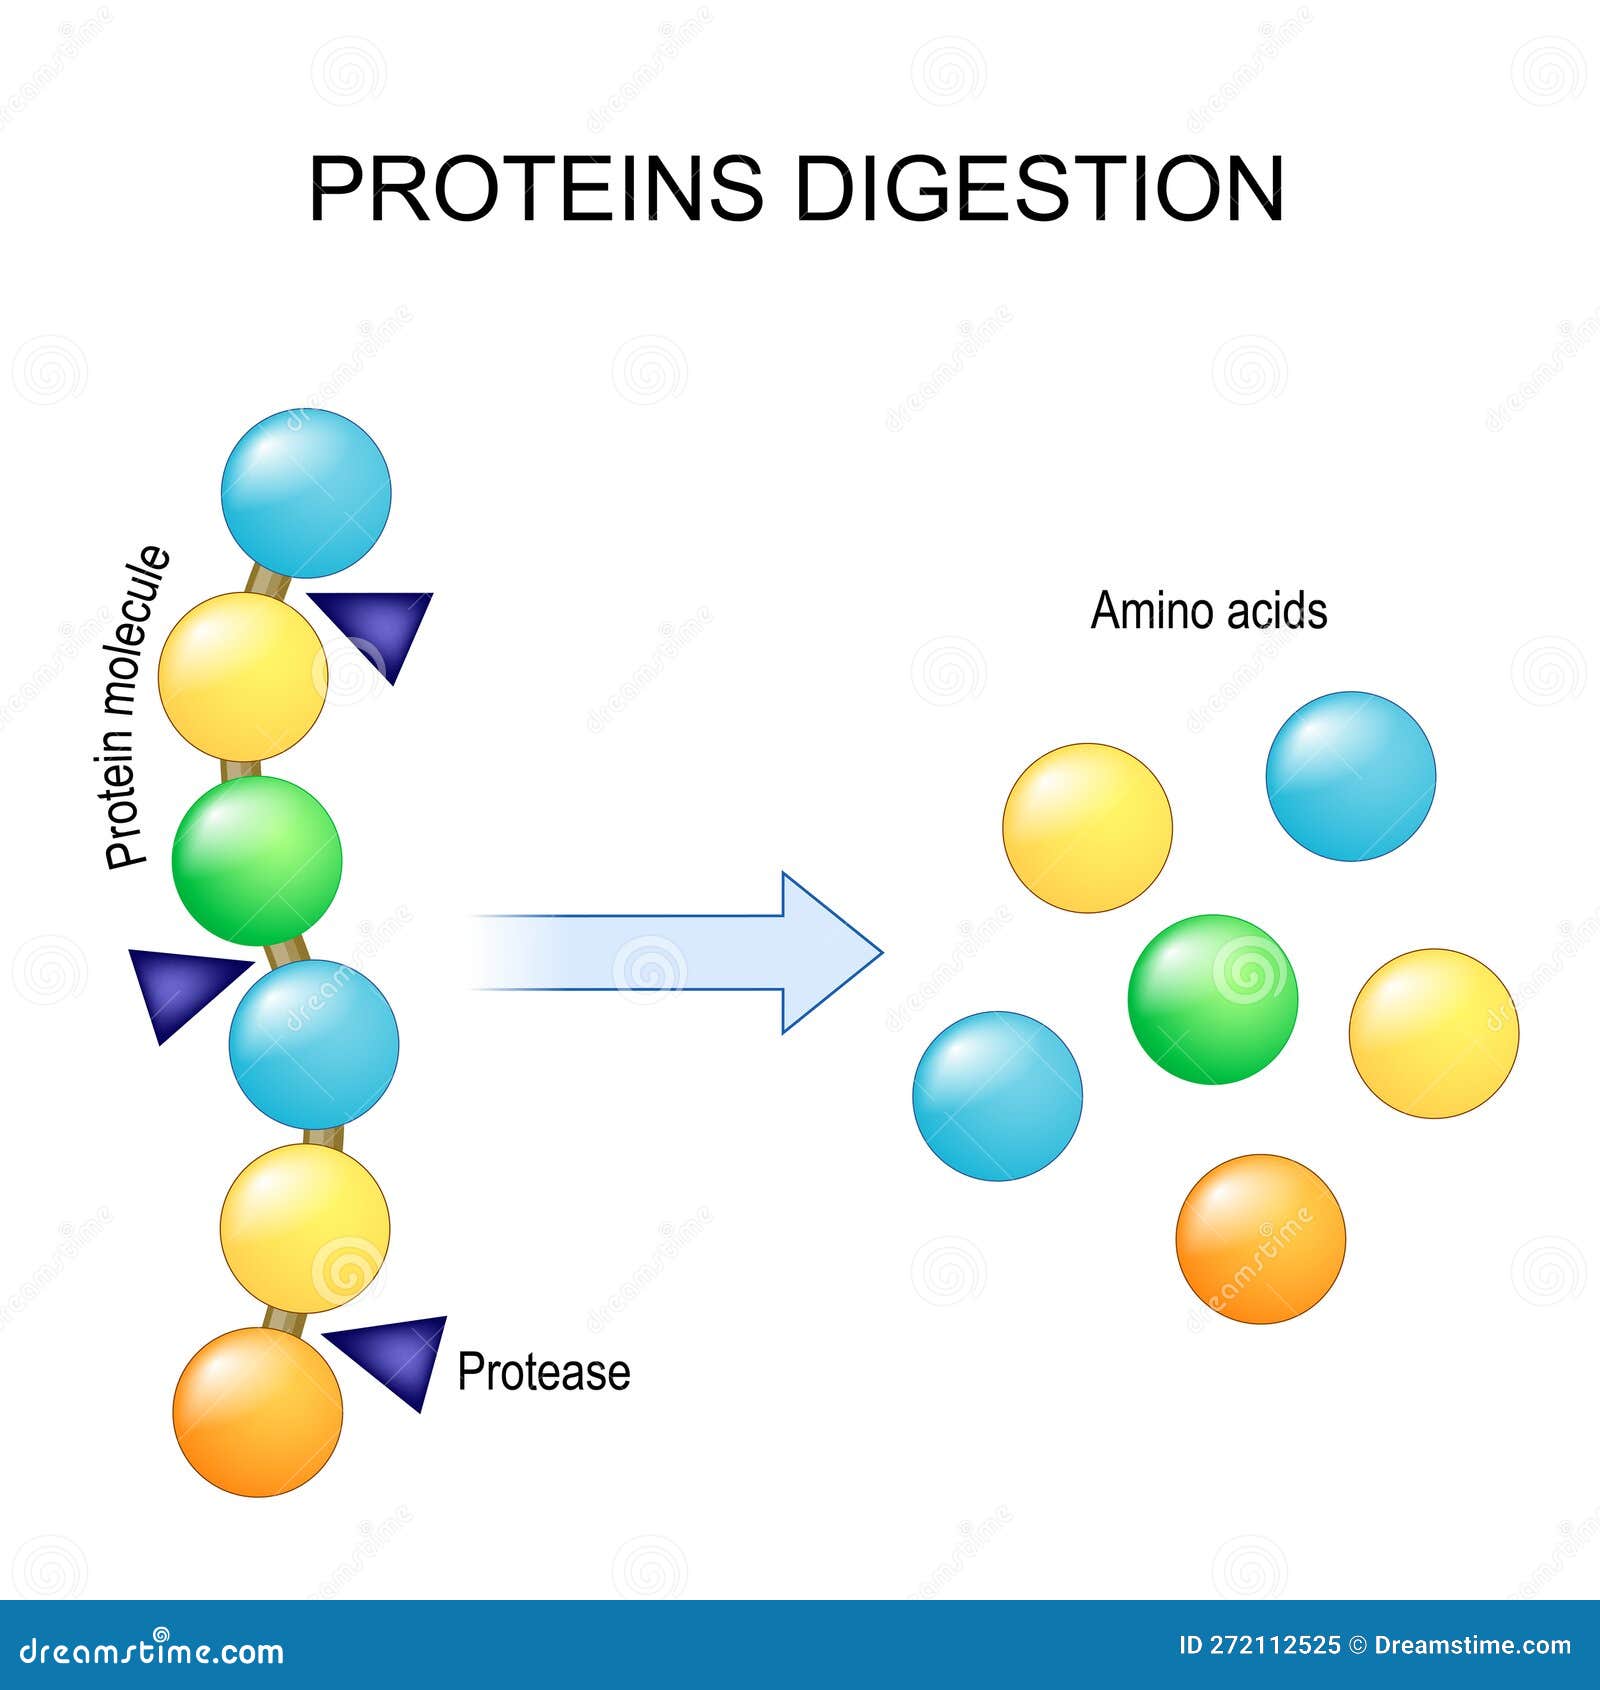 protein digestion. enzymes proteases are digestion breaks the protein into single amino acids